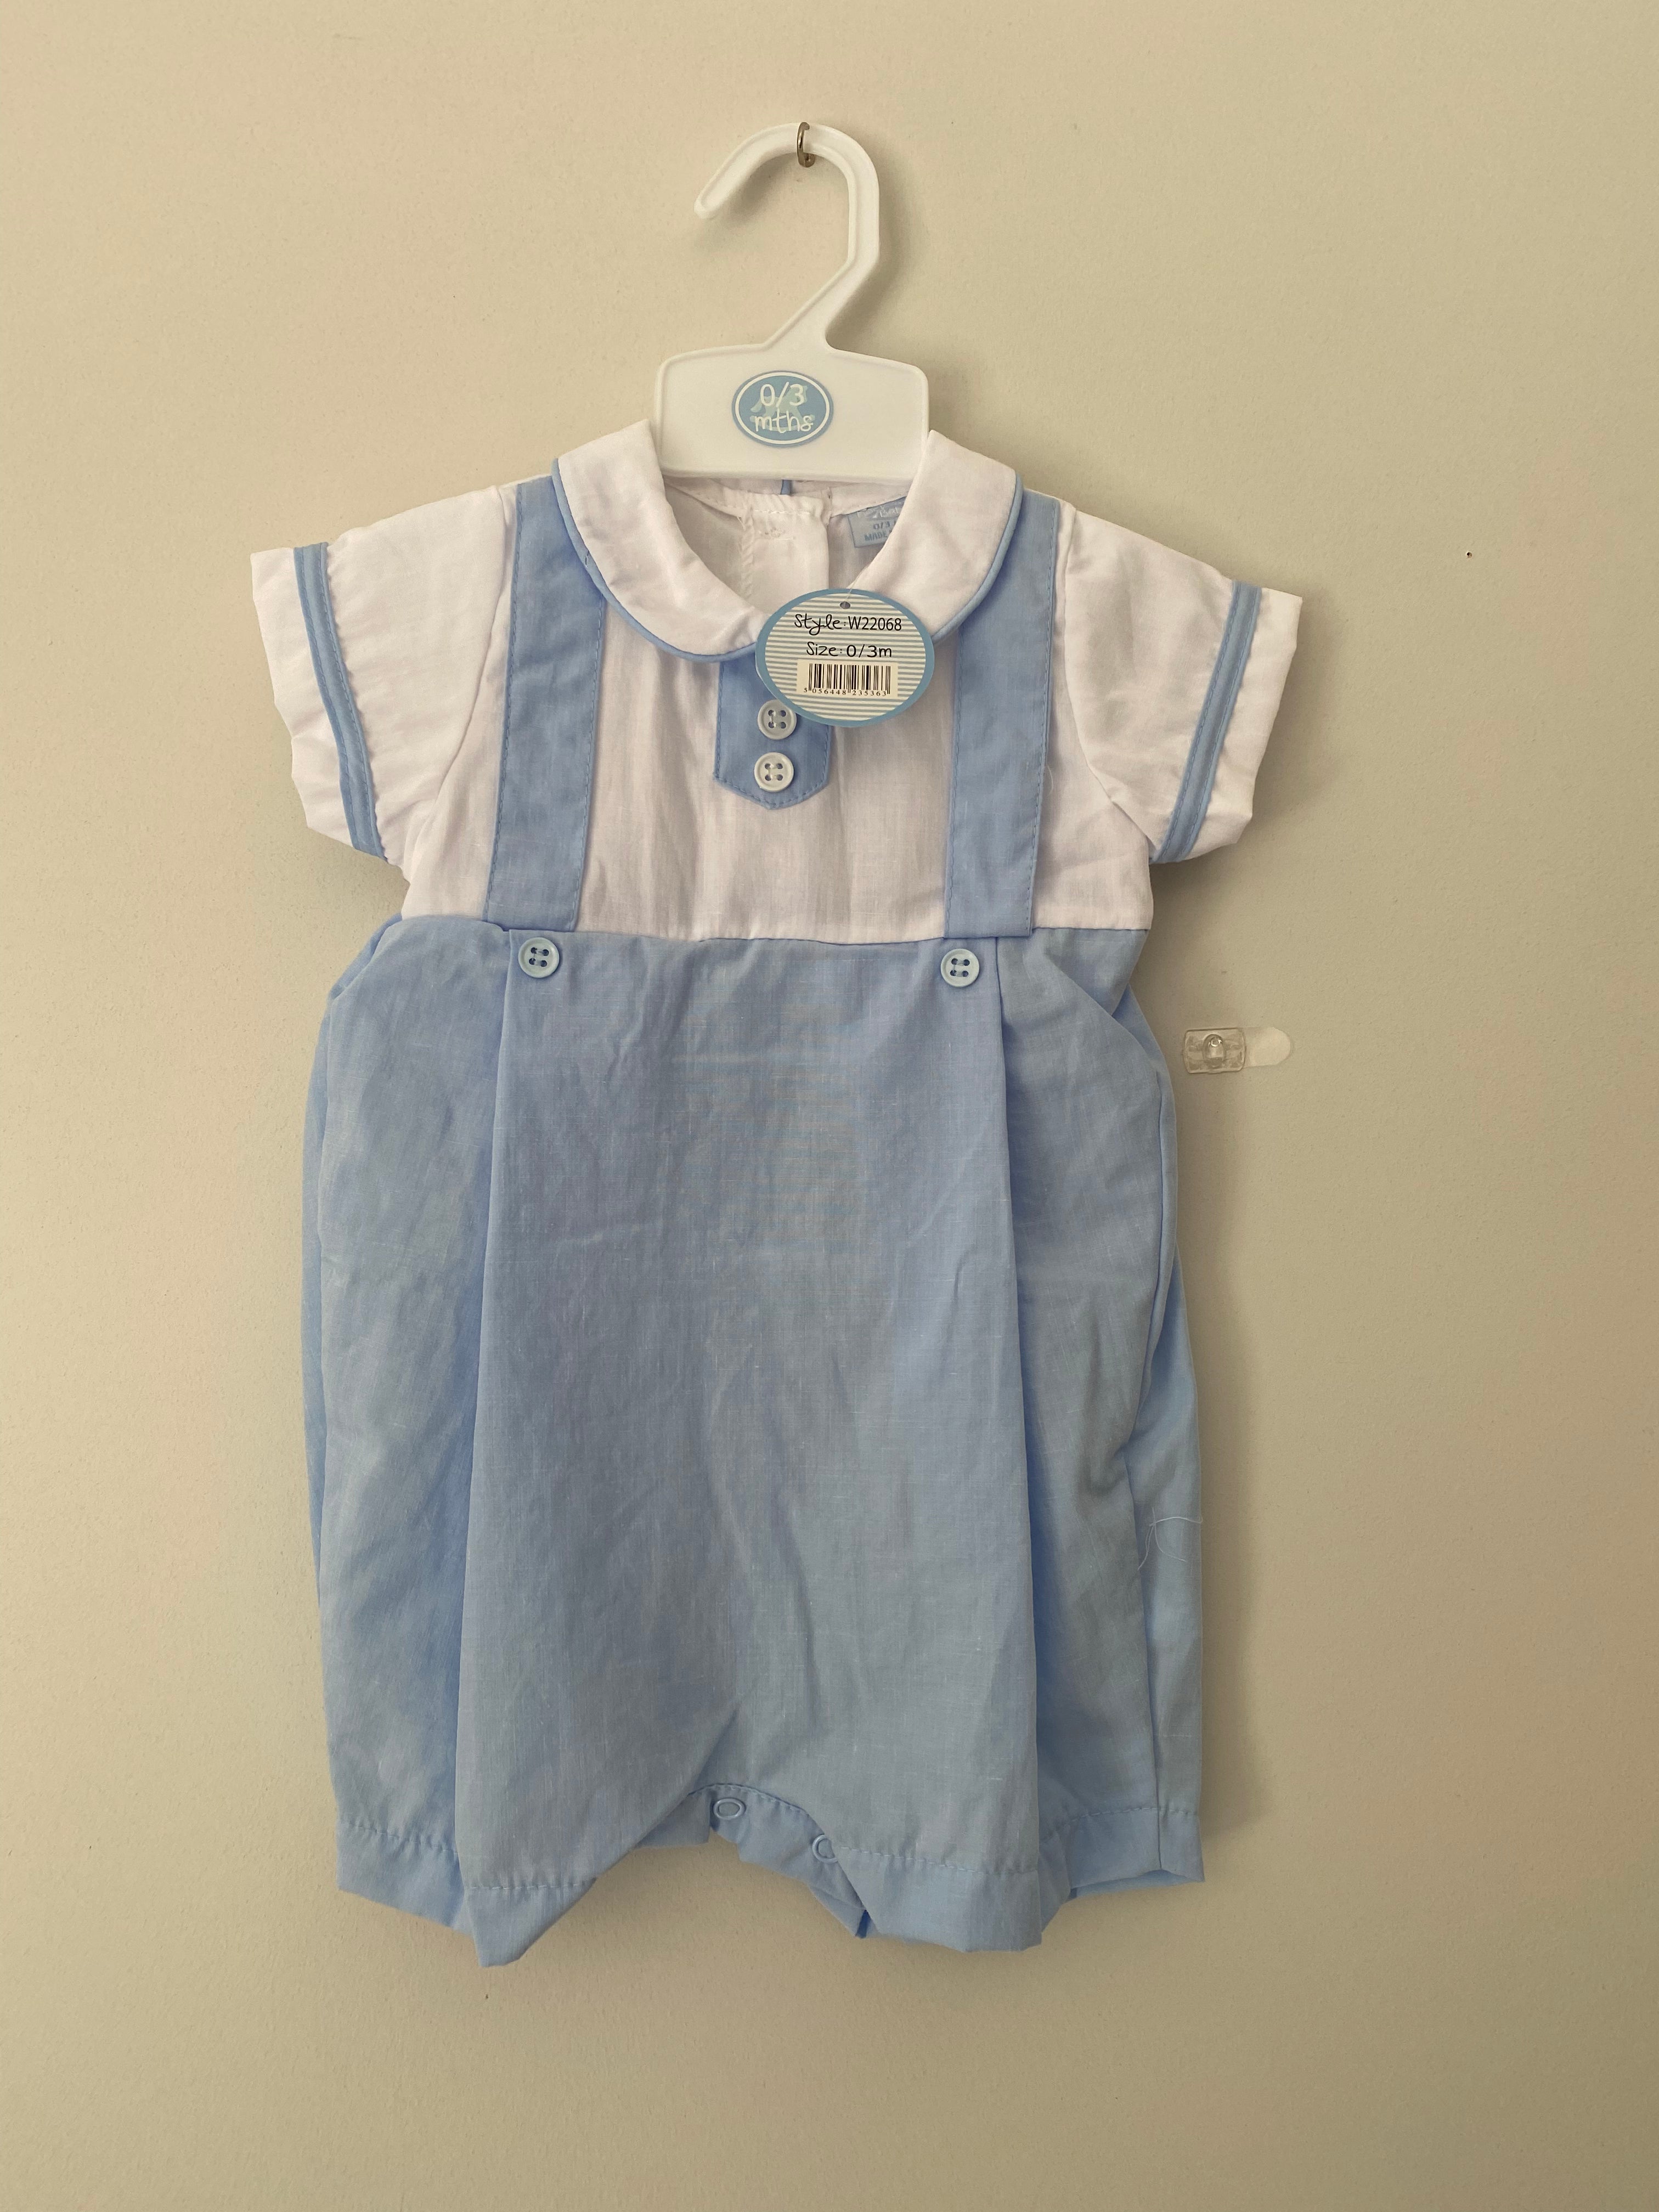 Blue and White Button Detail Romper - W22068